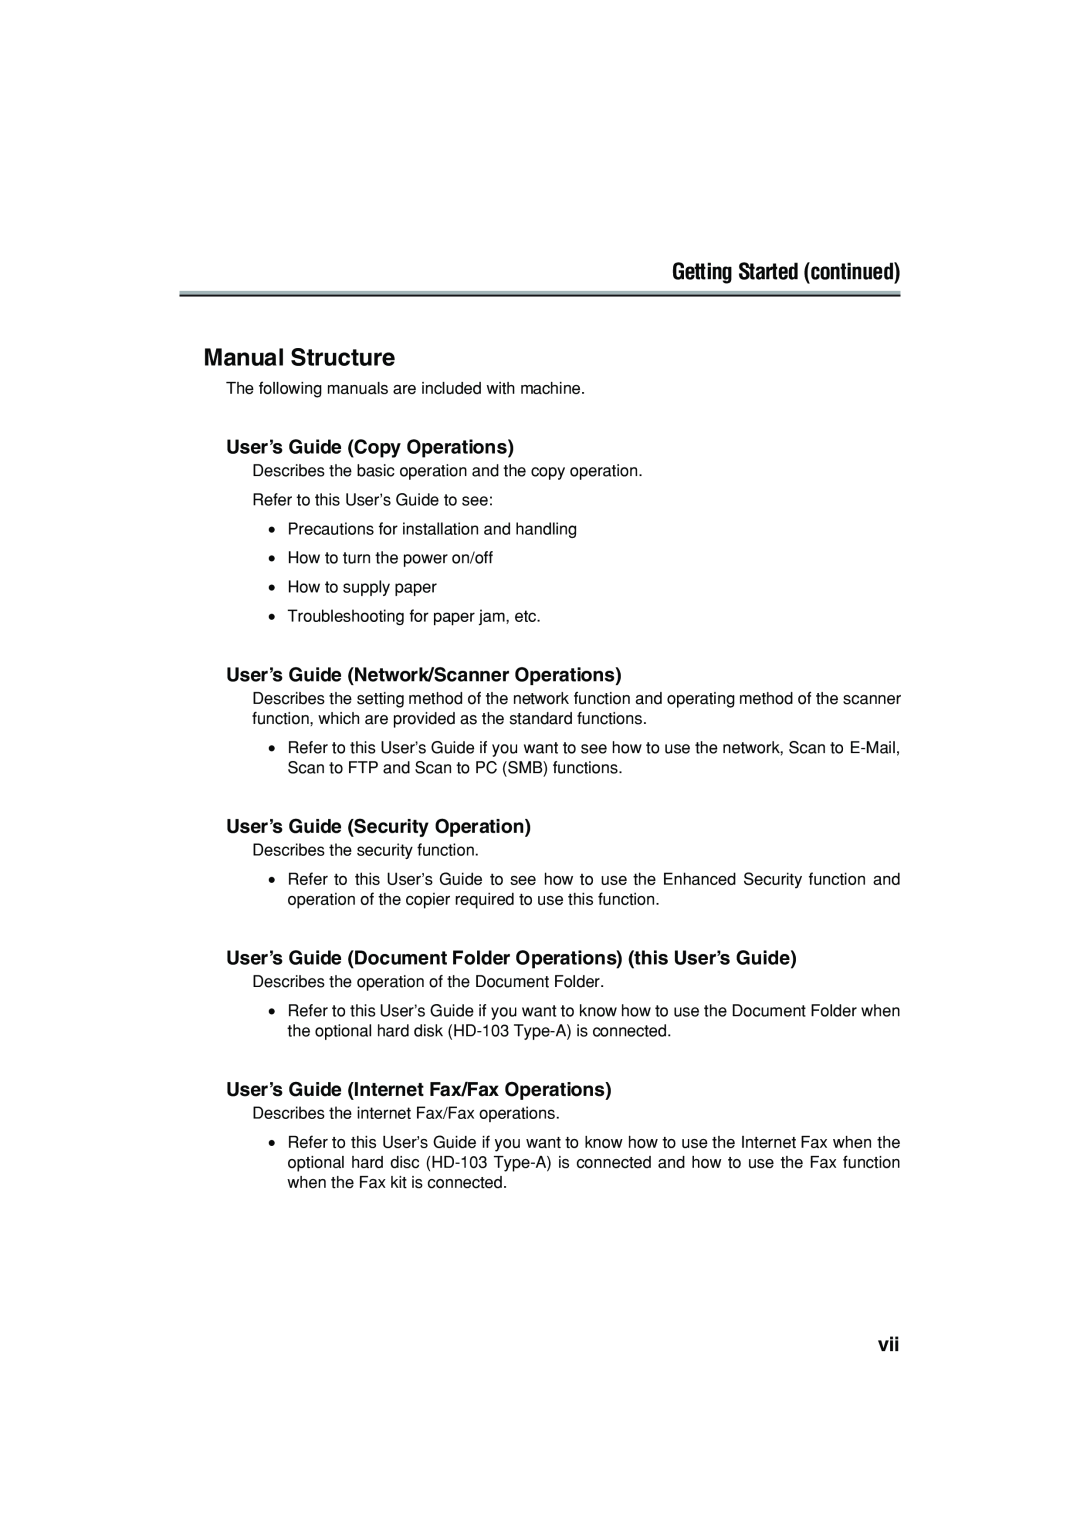 Konica Minolta 7222 manual Manual Structure, Getting Started continued, User’s Guide Copy Operations 